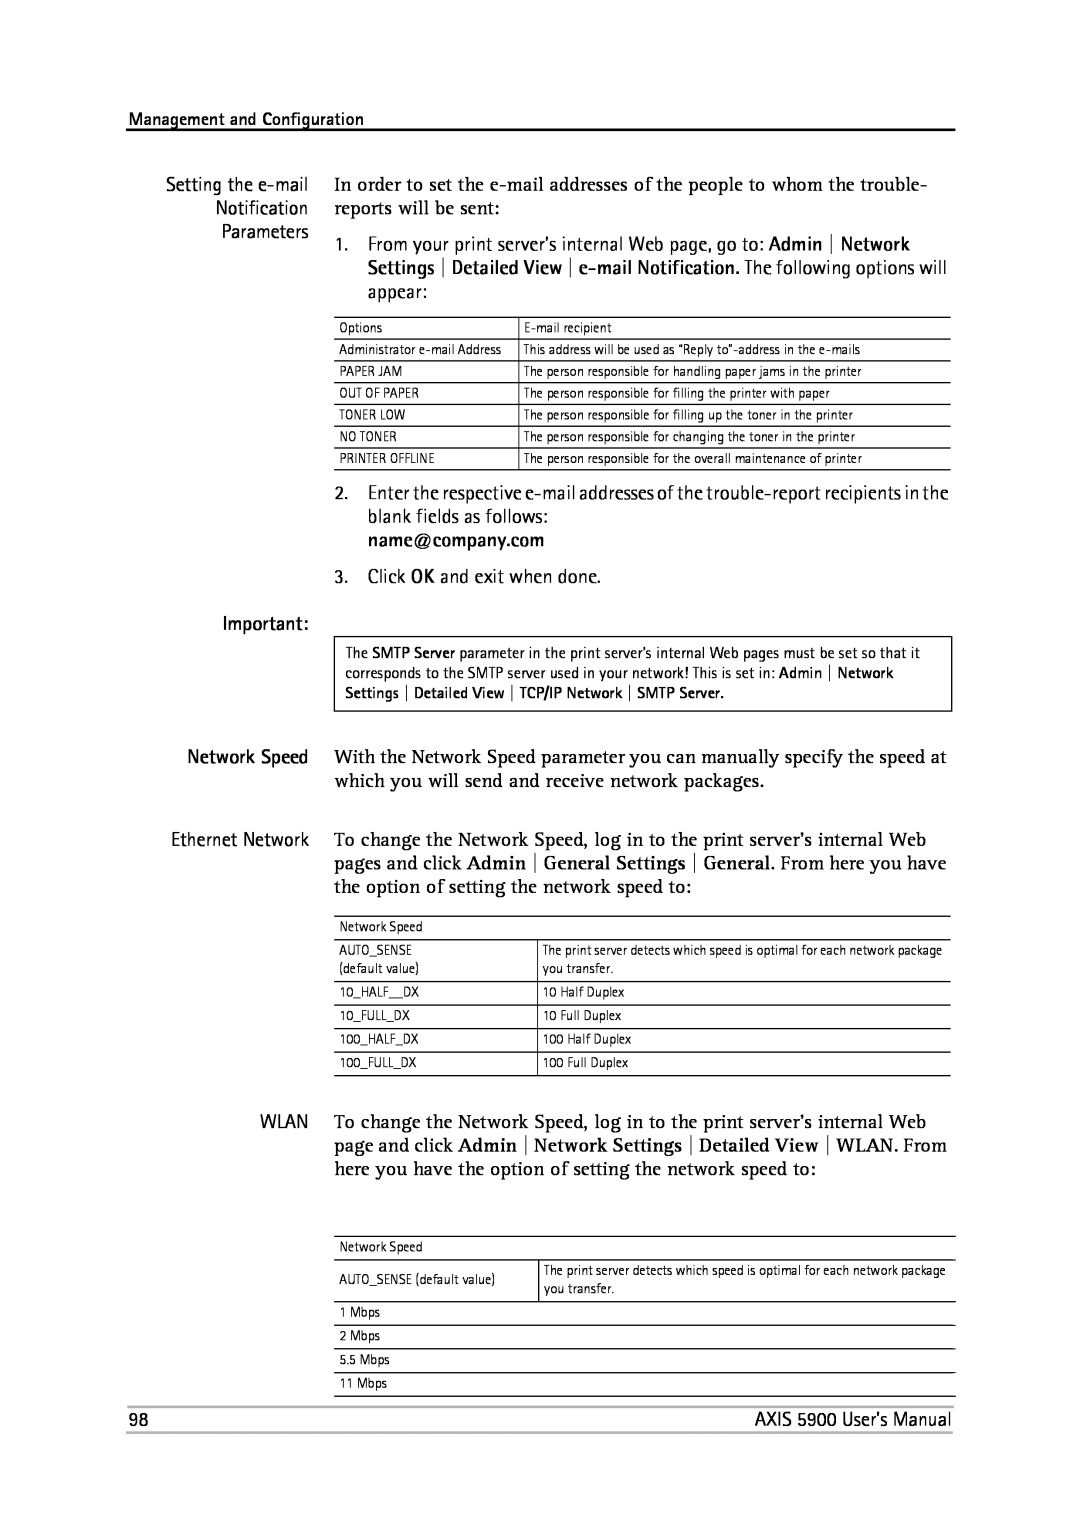 Philips 5900 user manual Setting the e-mail Notification Parameters 